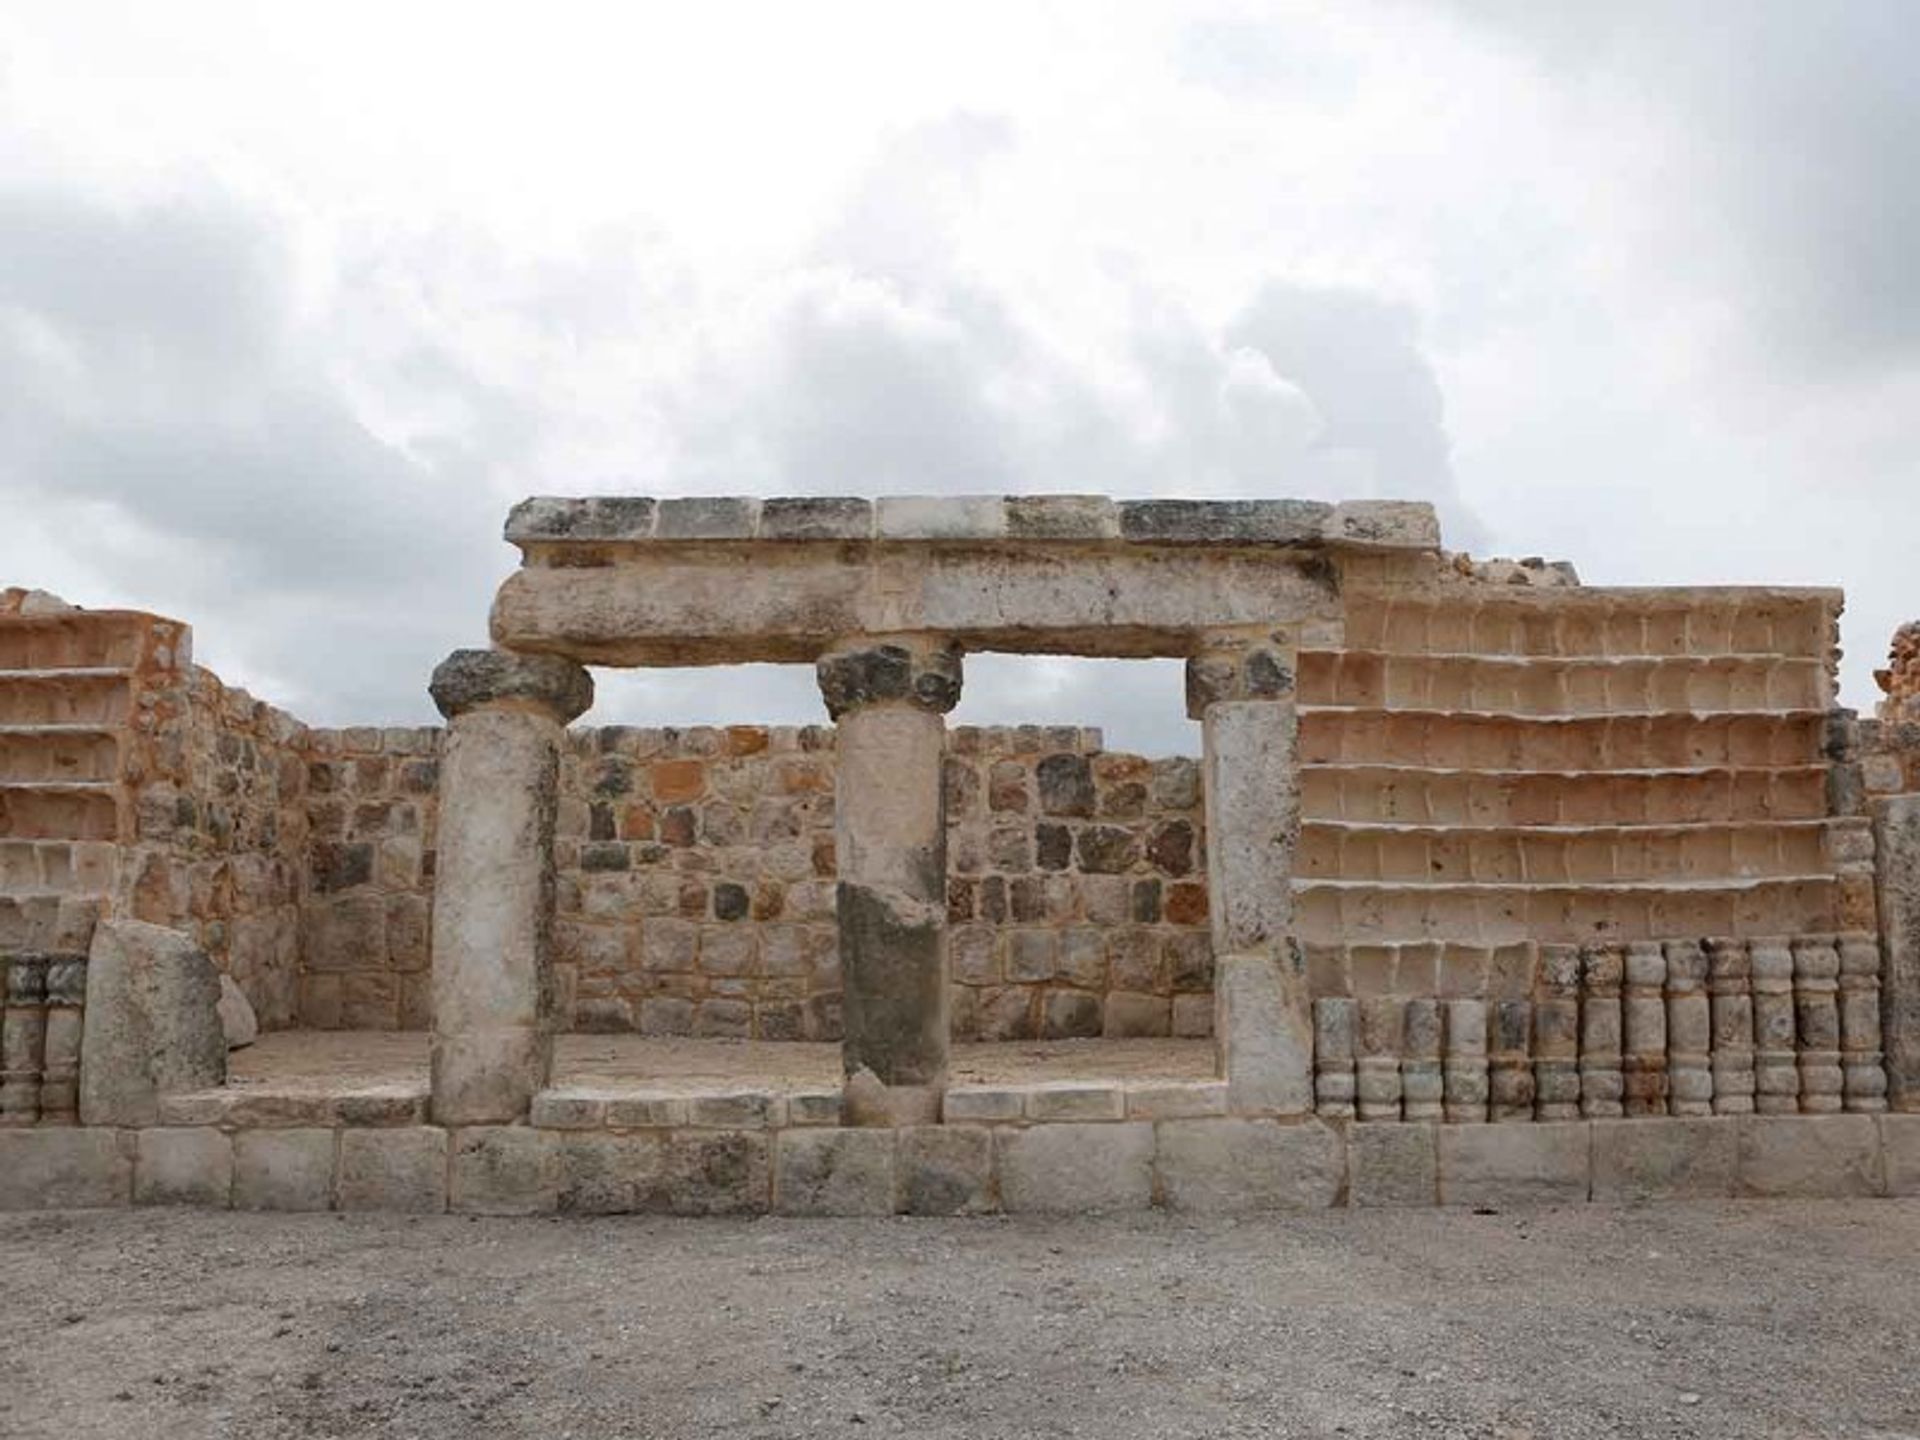 The Maya ruins of Xiol were discovered during an assessment for the construction of an industrial park. Reuters. 